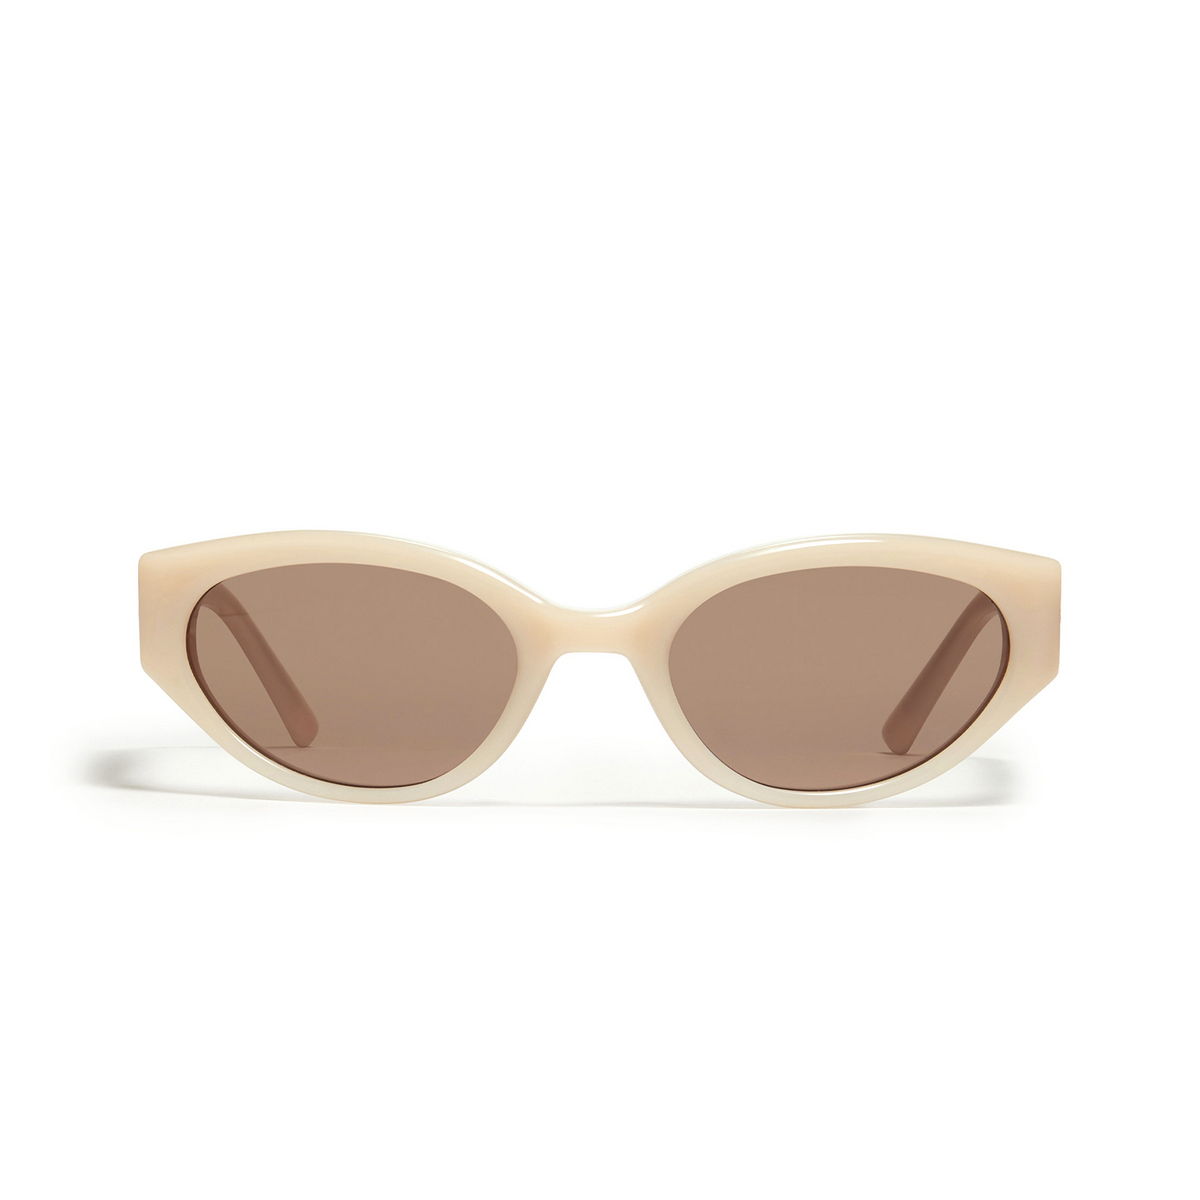 Gentle Monster® Cat-eye Sunglasses: Molto color IV1 Ivory - front view